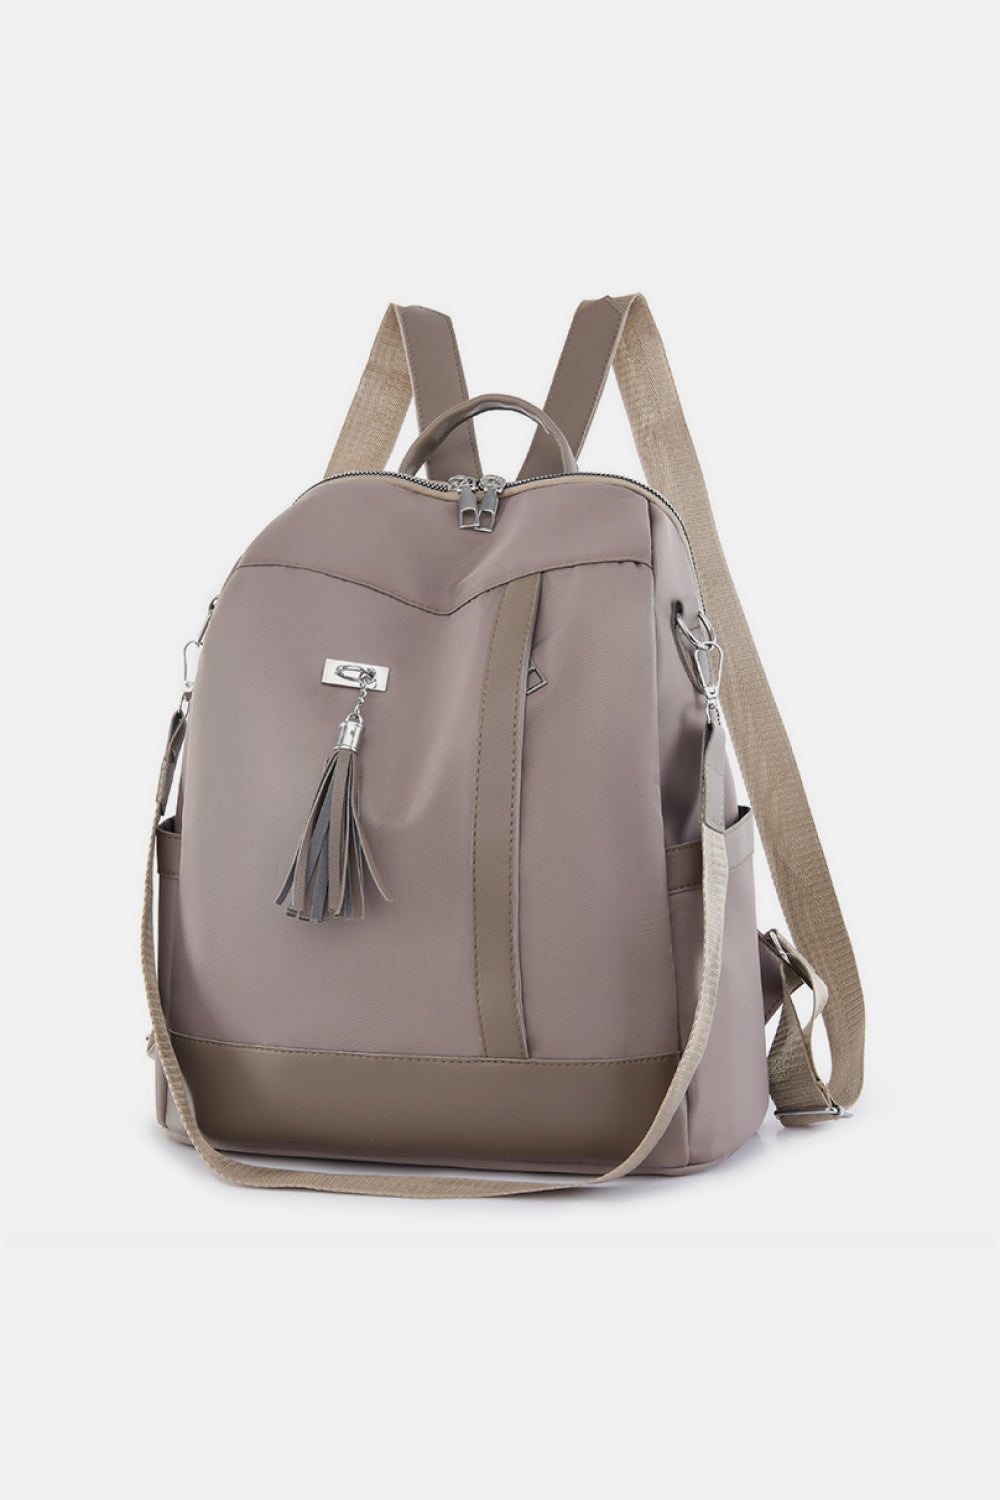 Oxford Cloth Tassel Decorated Backpack